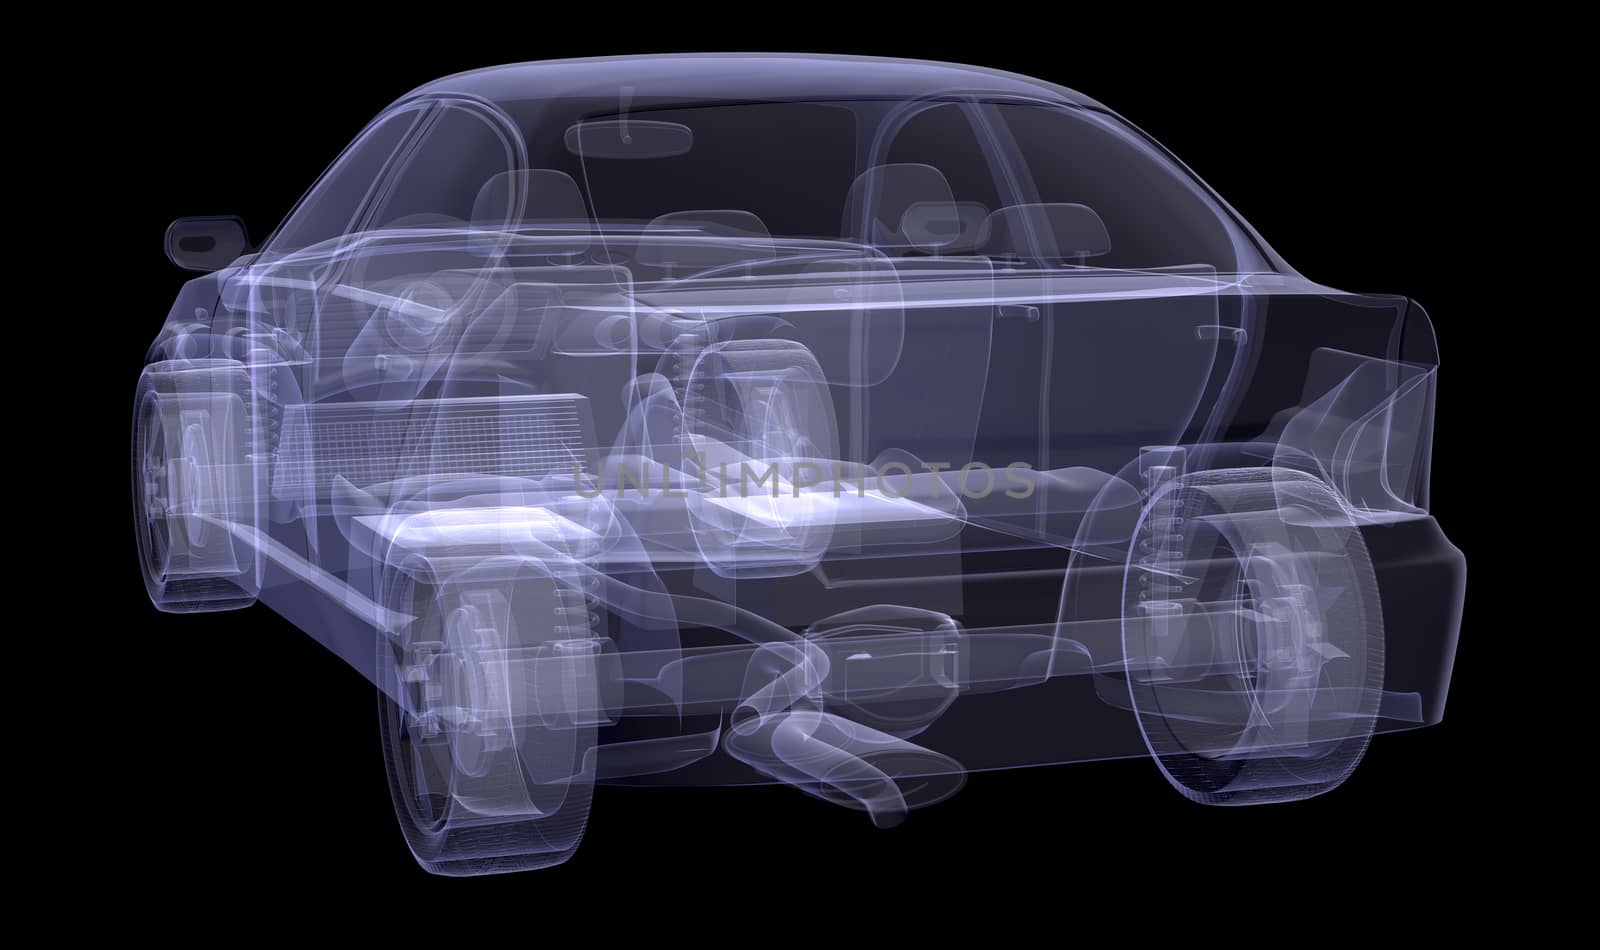 X-ray of car model on isolated black background, back view